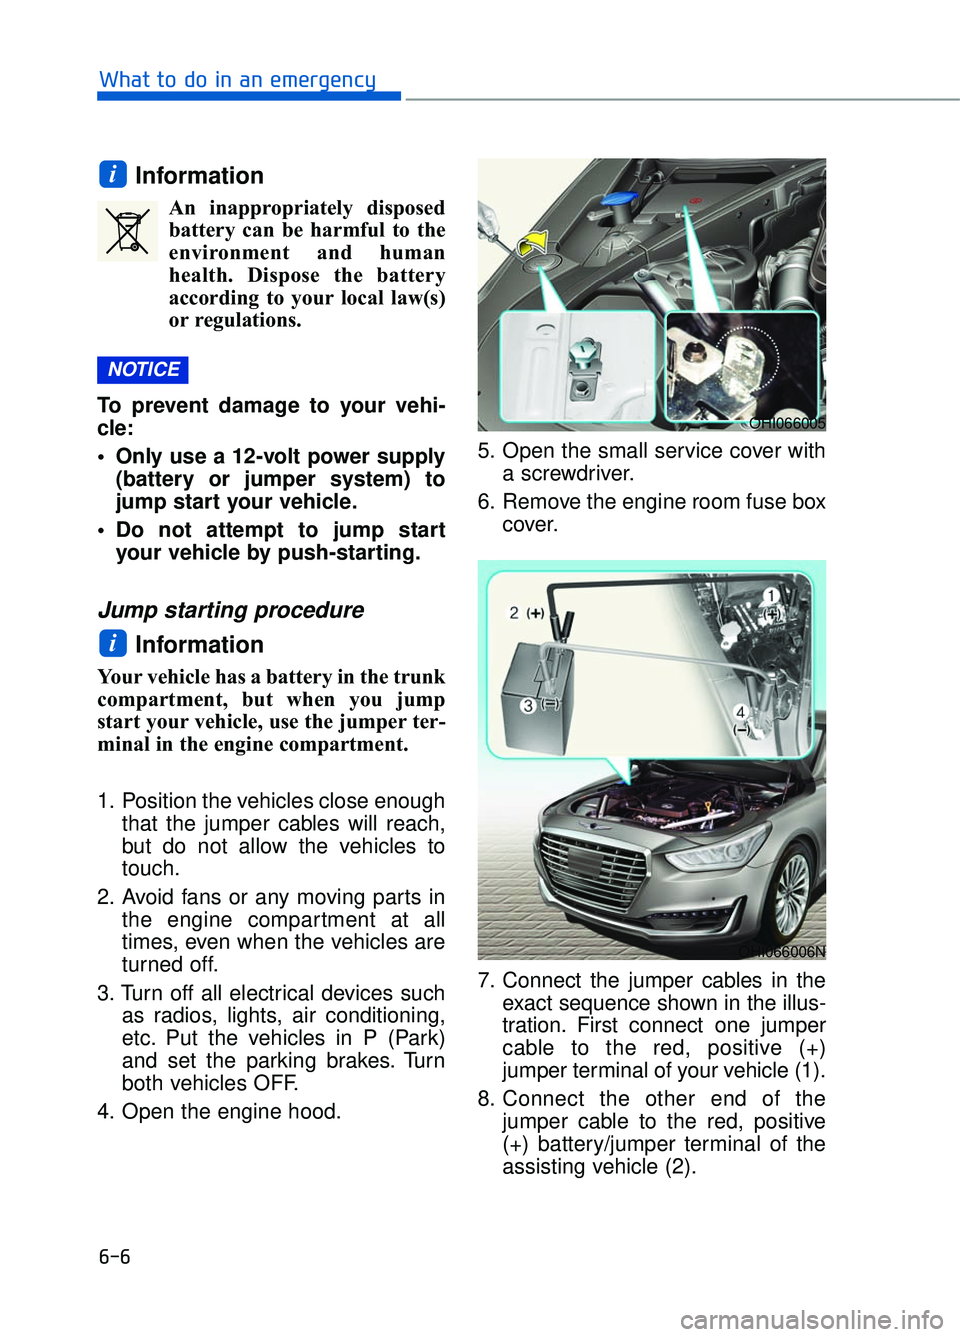 GENESIS G90 2017  Owners Manual Information
An inappropriately disposedbattery can be harmful to the
environment and human
health. Dispose the battery
according to your local law(s)
or regulations.
To prevent damage to your vehi-
cl